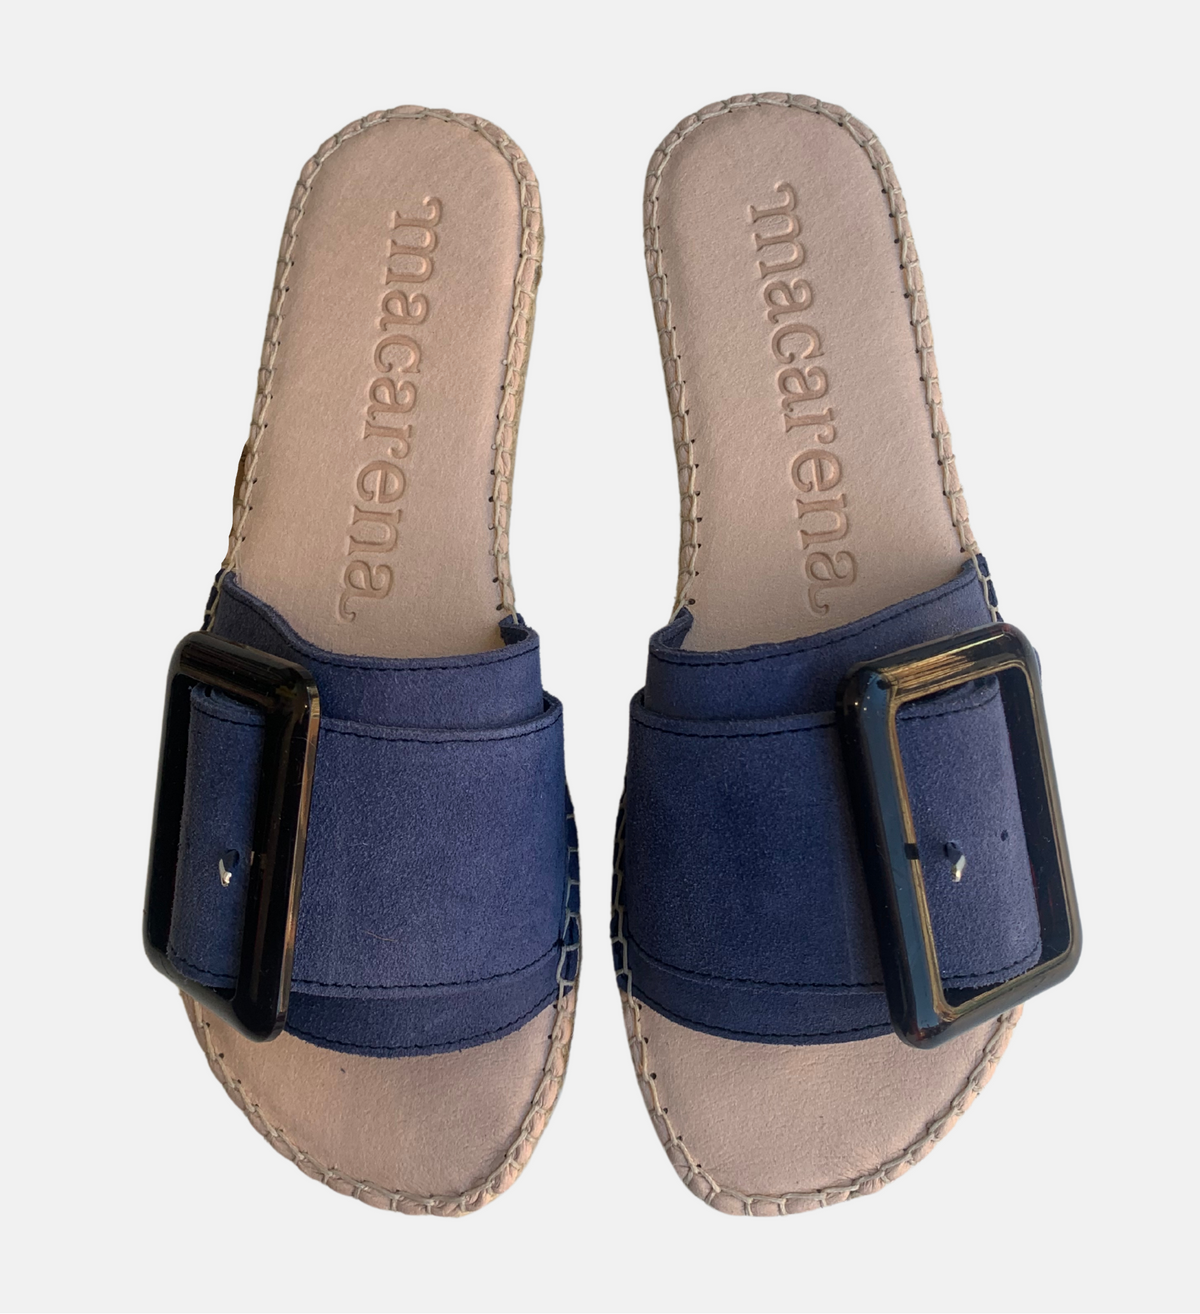 navy sliders with buckle